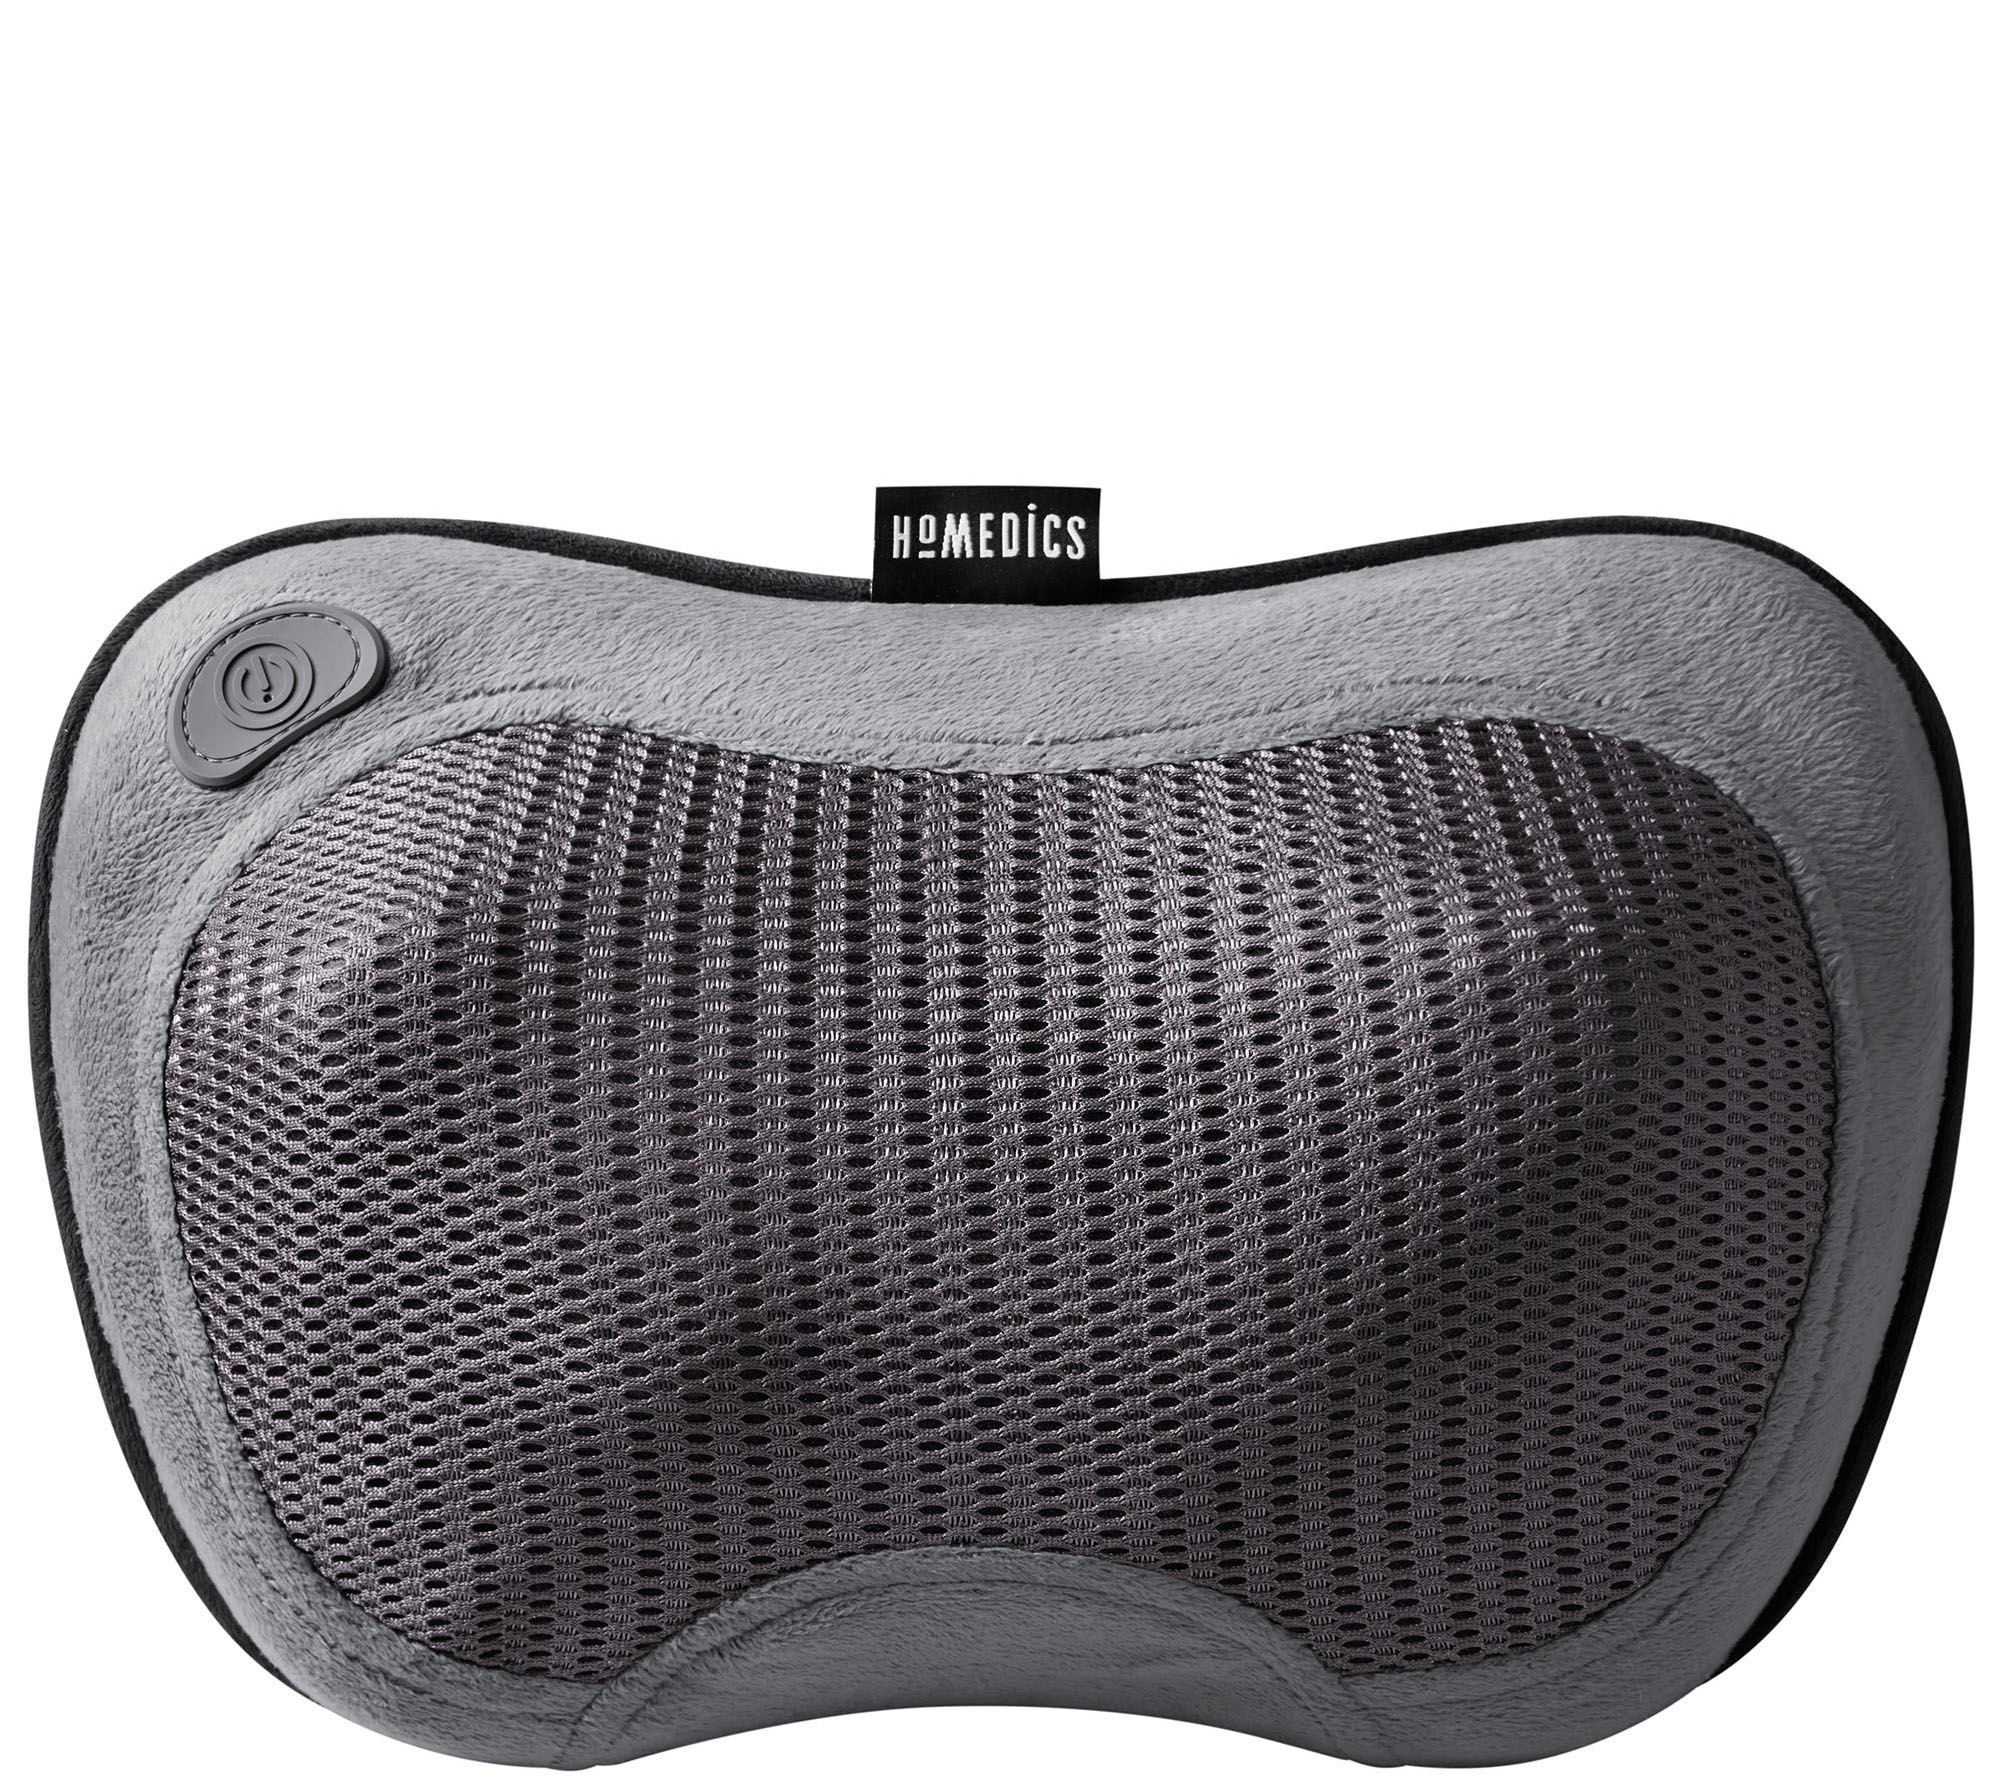 Sharper Image Realtouch Shiatsu Wireless Neck and Back Battery Massage Ball  in the Stretching & Recovery department at